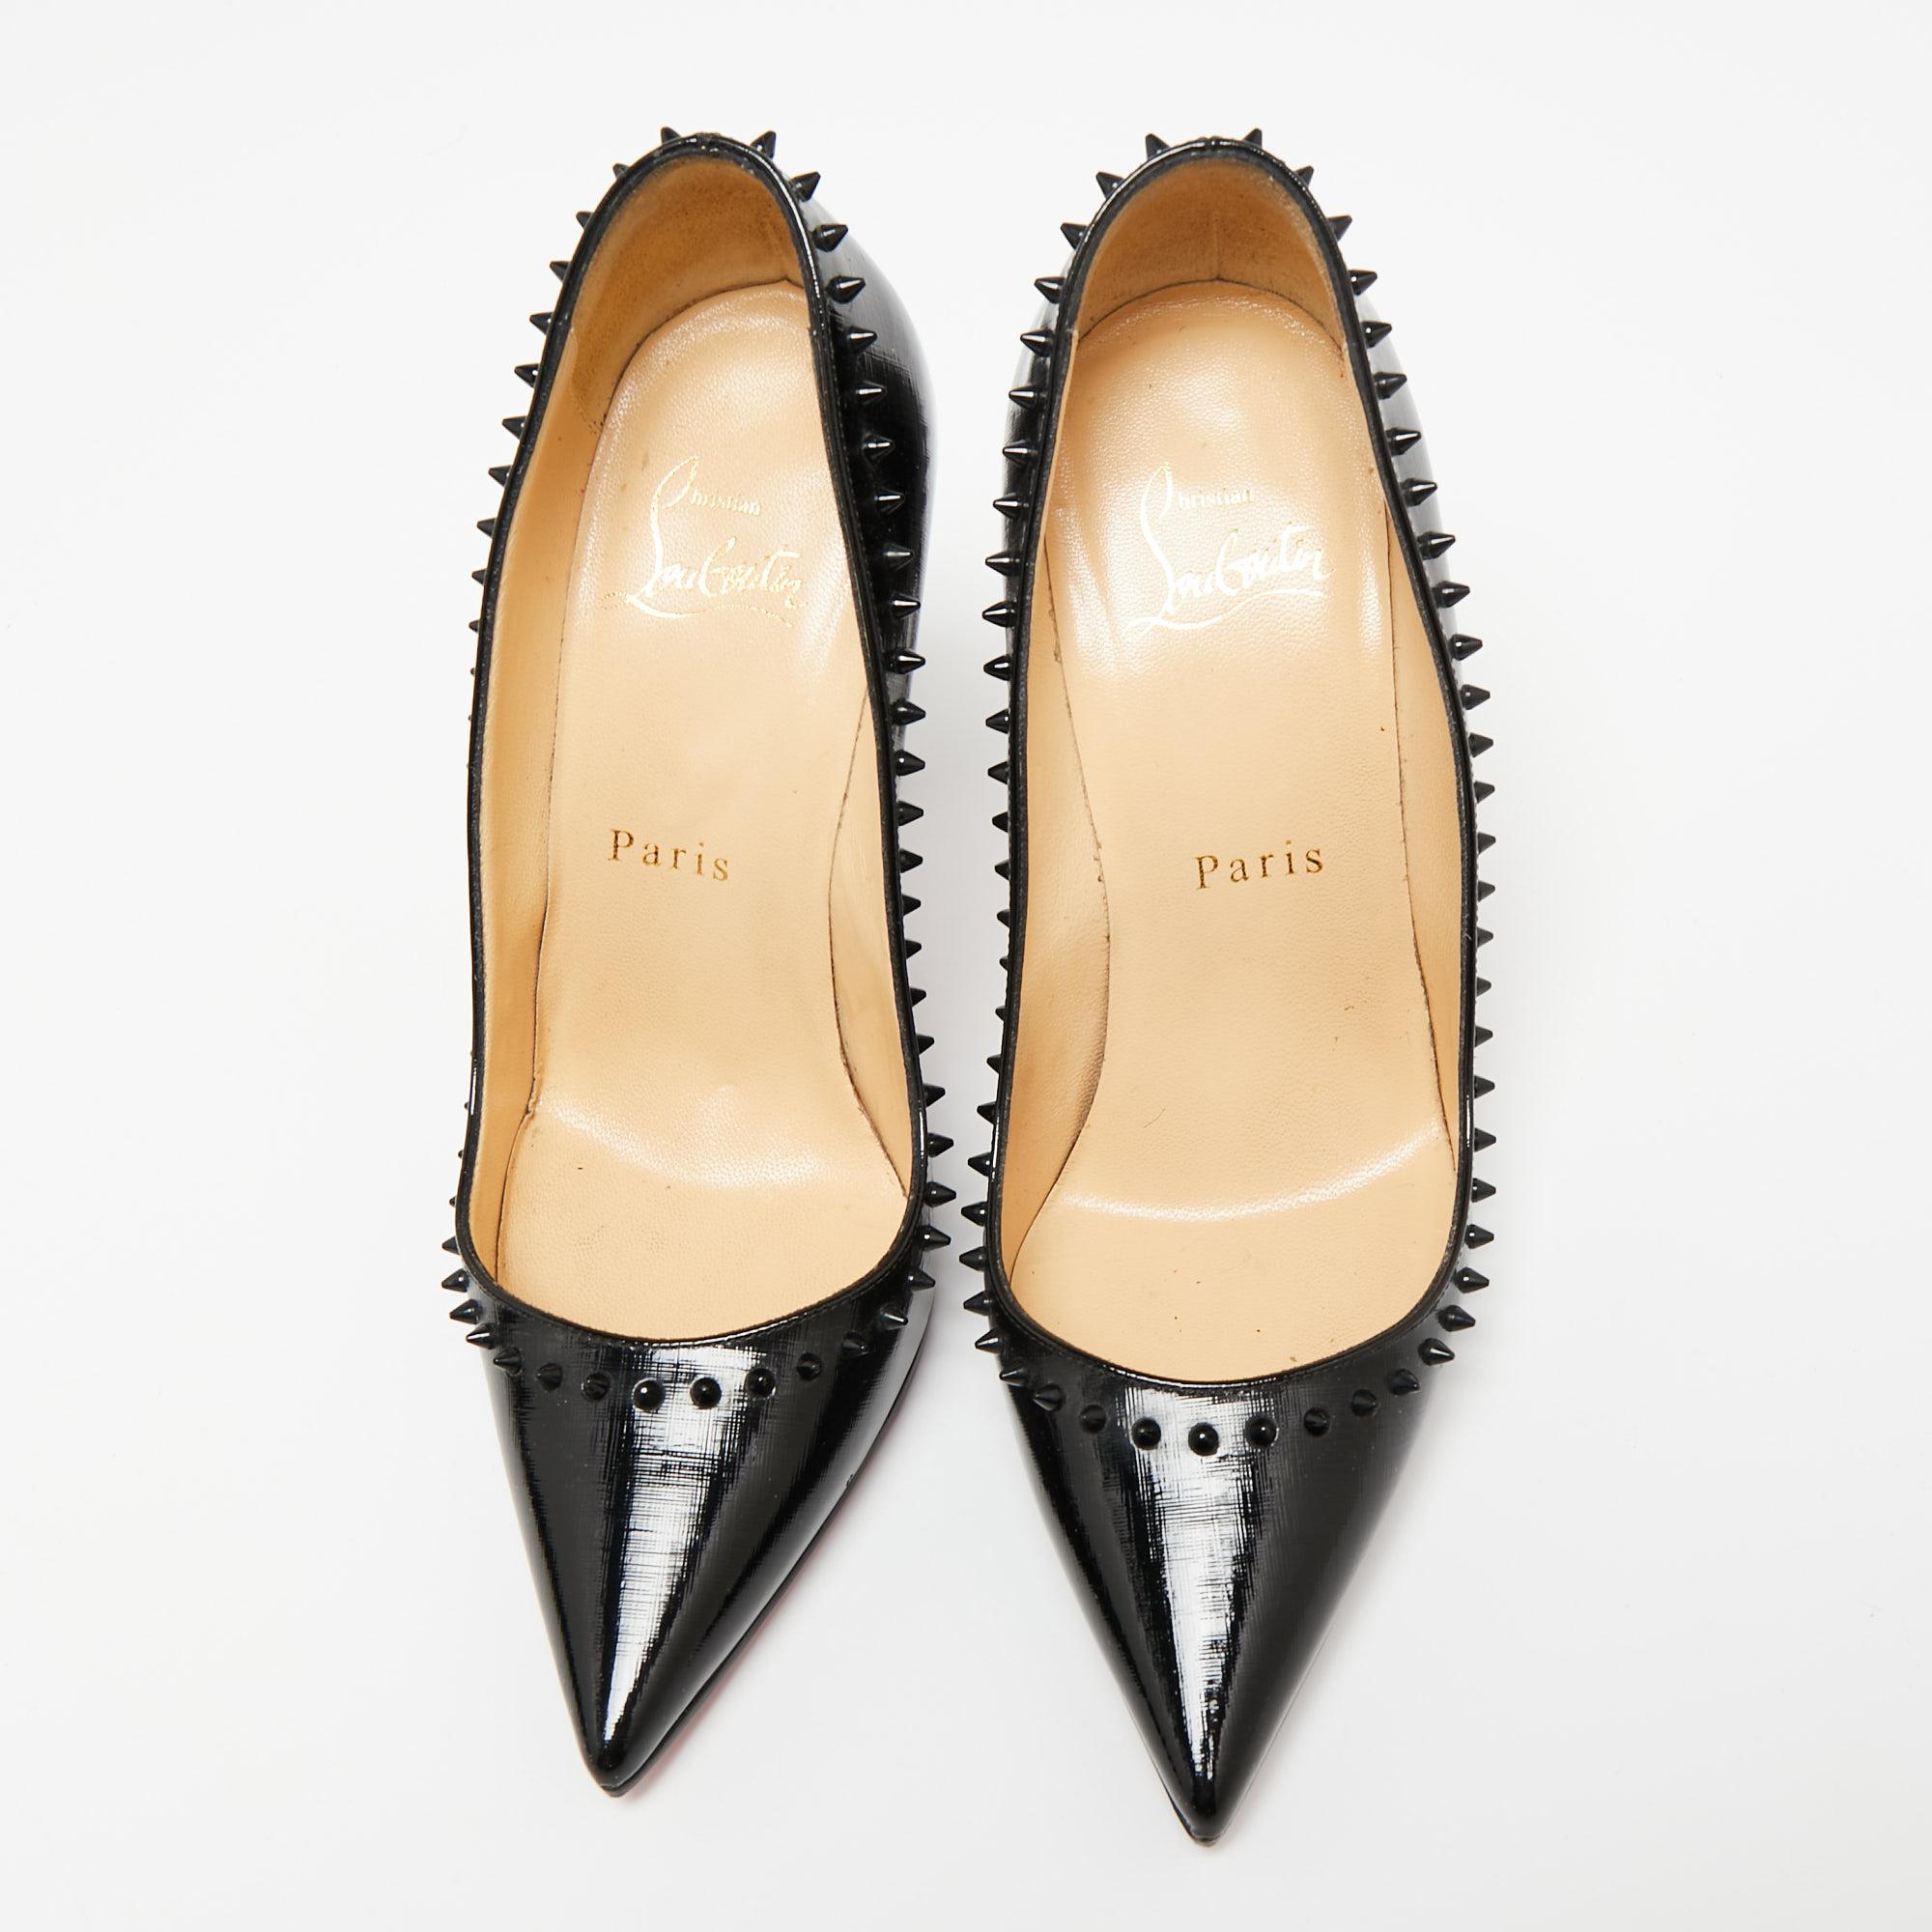 Always setting a benchmark, Christian Louboutin introduces another creation from its enormous collection. These Anjalina pumps look exclusively gorgeous with the spike embellishments in black tone. Crafted with patent leather, this pair has